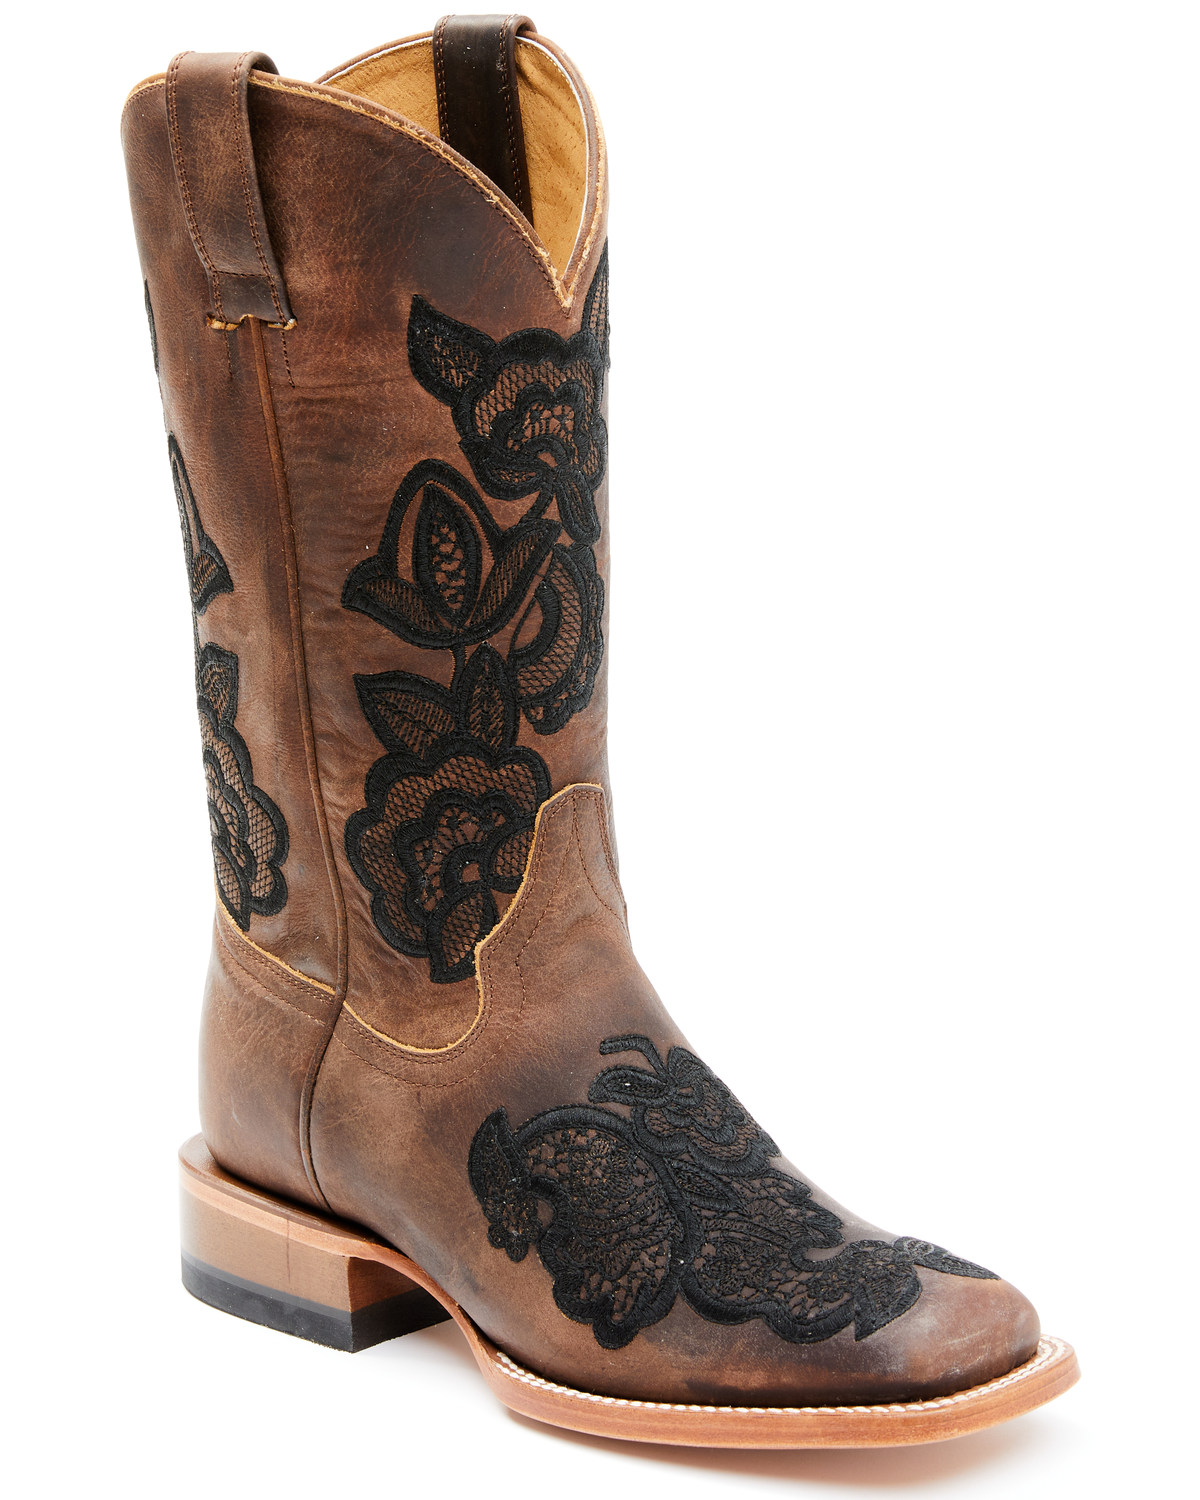 Shyanne Women's Mabel Western Boots - Broad Square Toe